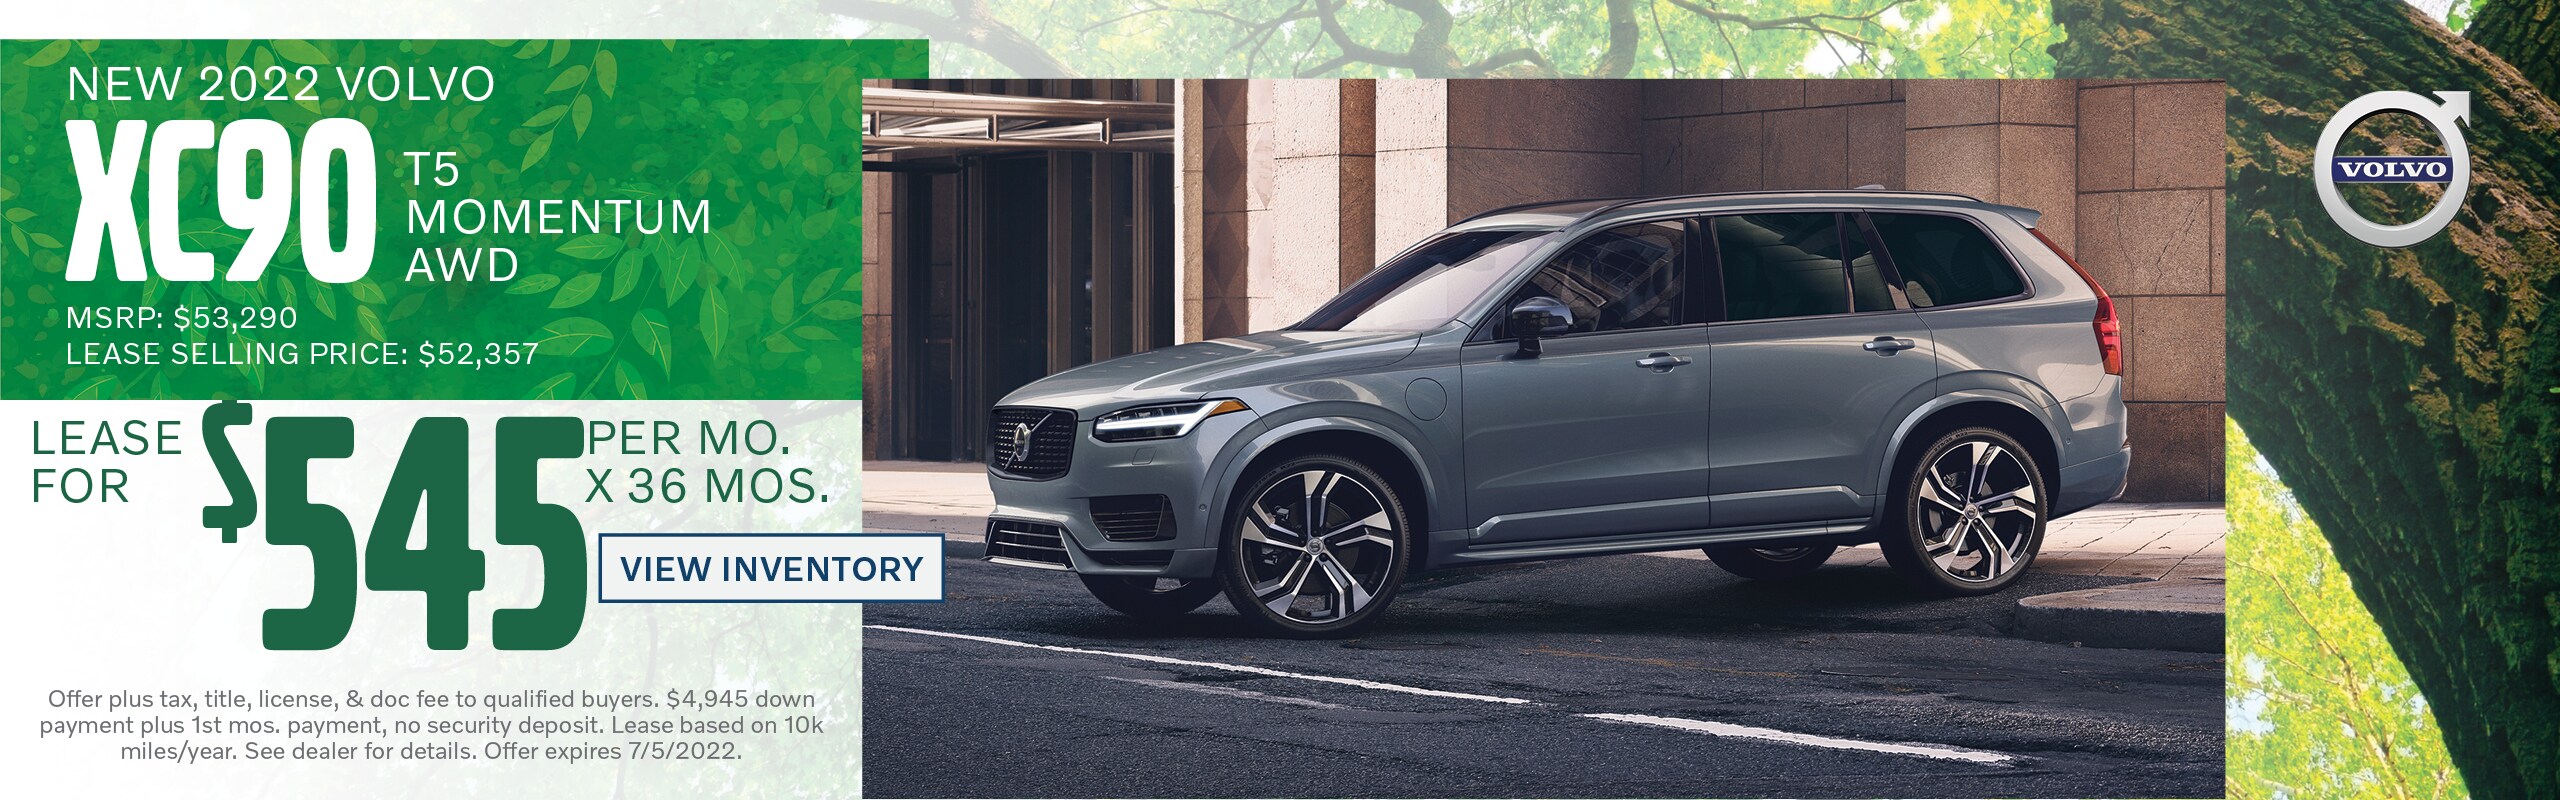 2022 Volvo XC90 T5 Momentum AWD lease for $545 per month for 36 months - Lease selling price: $52,357 and MSRP $53,290